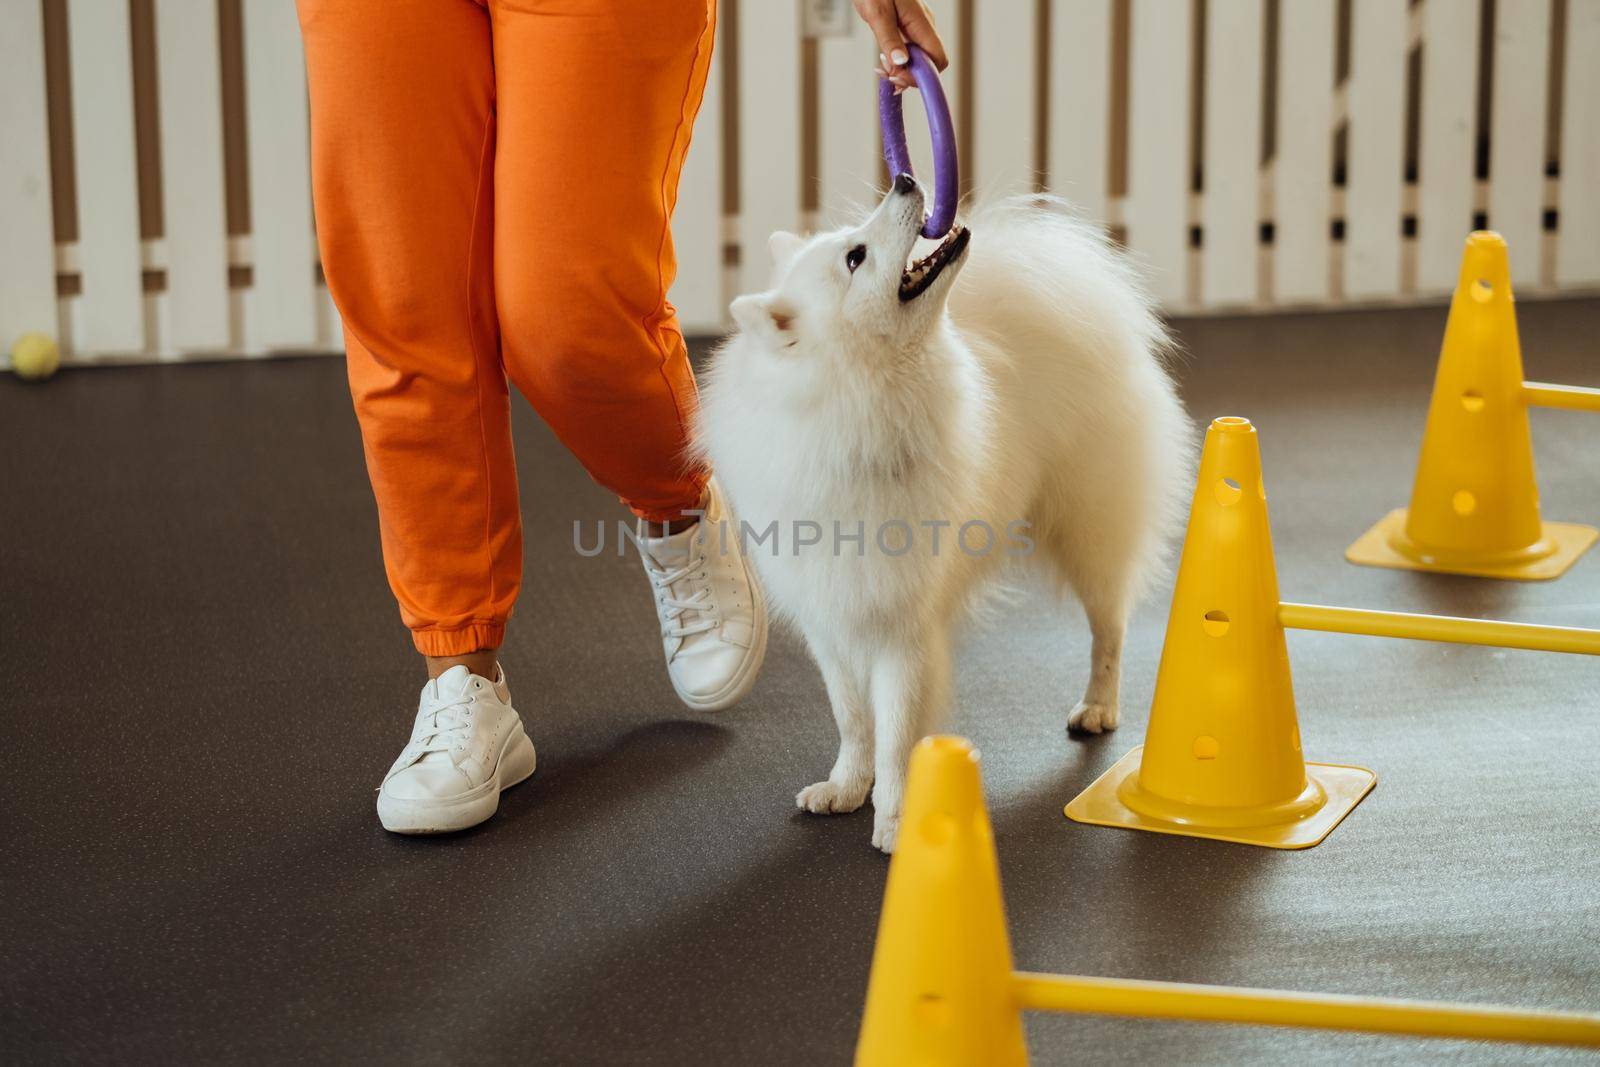 Snow-white dog breed Japanese Spitz training in pet house with trainer by Romvy